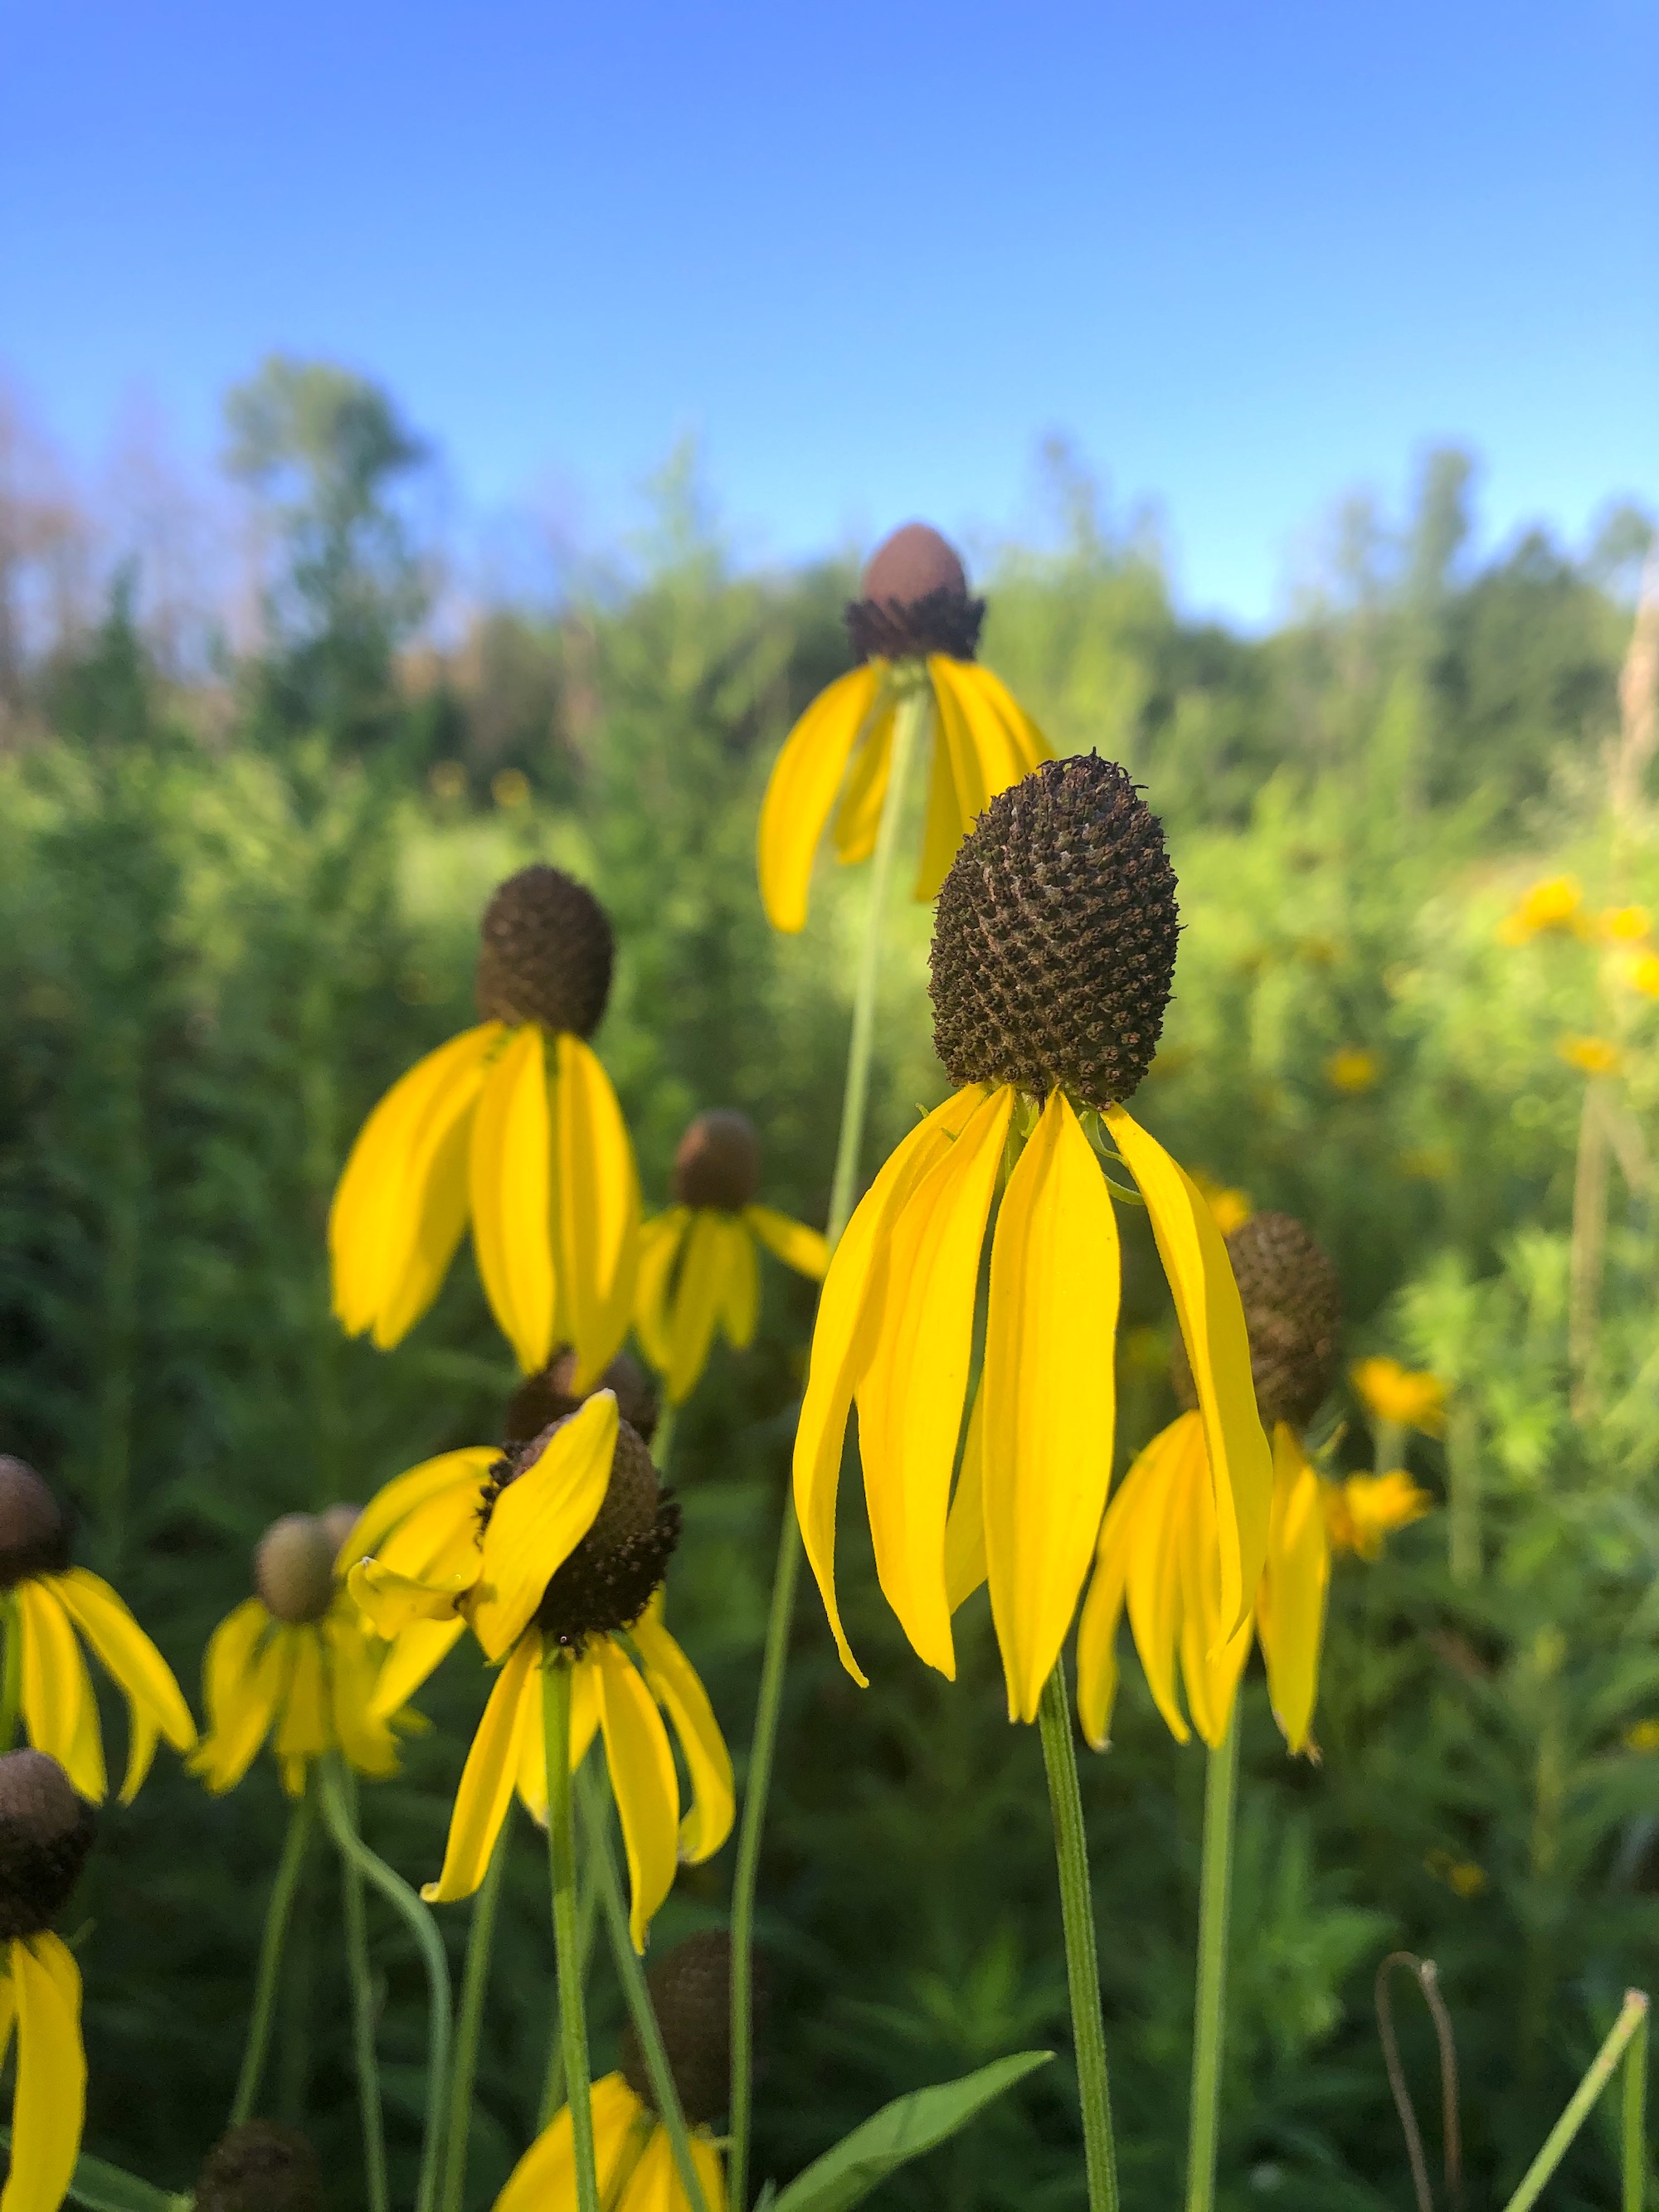 ray-headed coneflower on on shore of Marion Dunn Pond in Madison, Wisconsin on July 29, 2020.